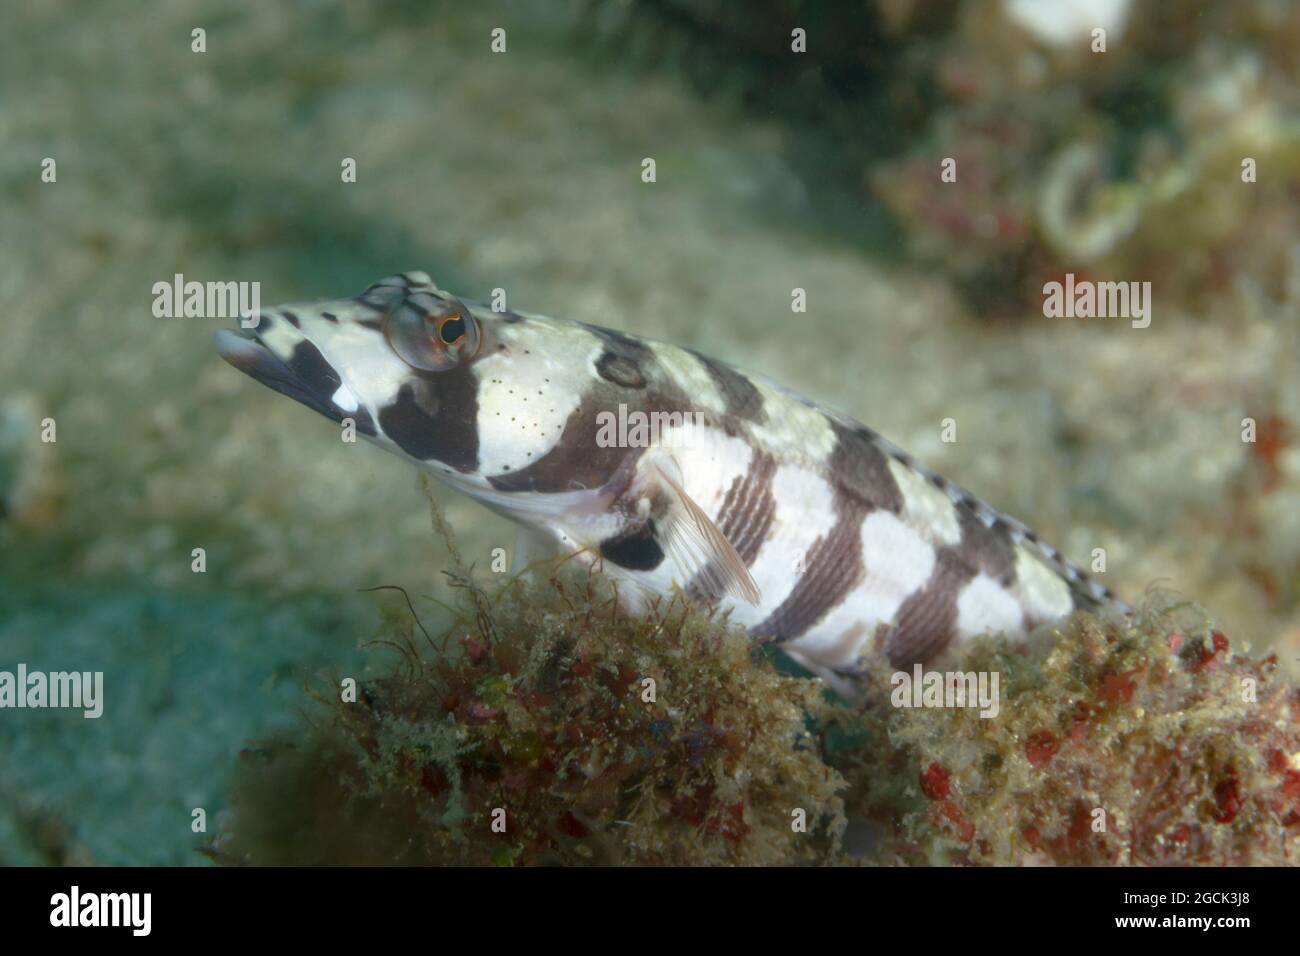 Closeup of tropical marine Reticulated sandperch or Parapercis tetracantha fish with long spotted body swimming in deep ocean water Stock Photo